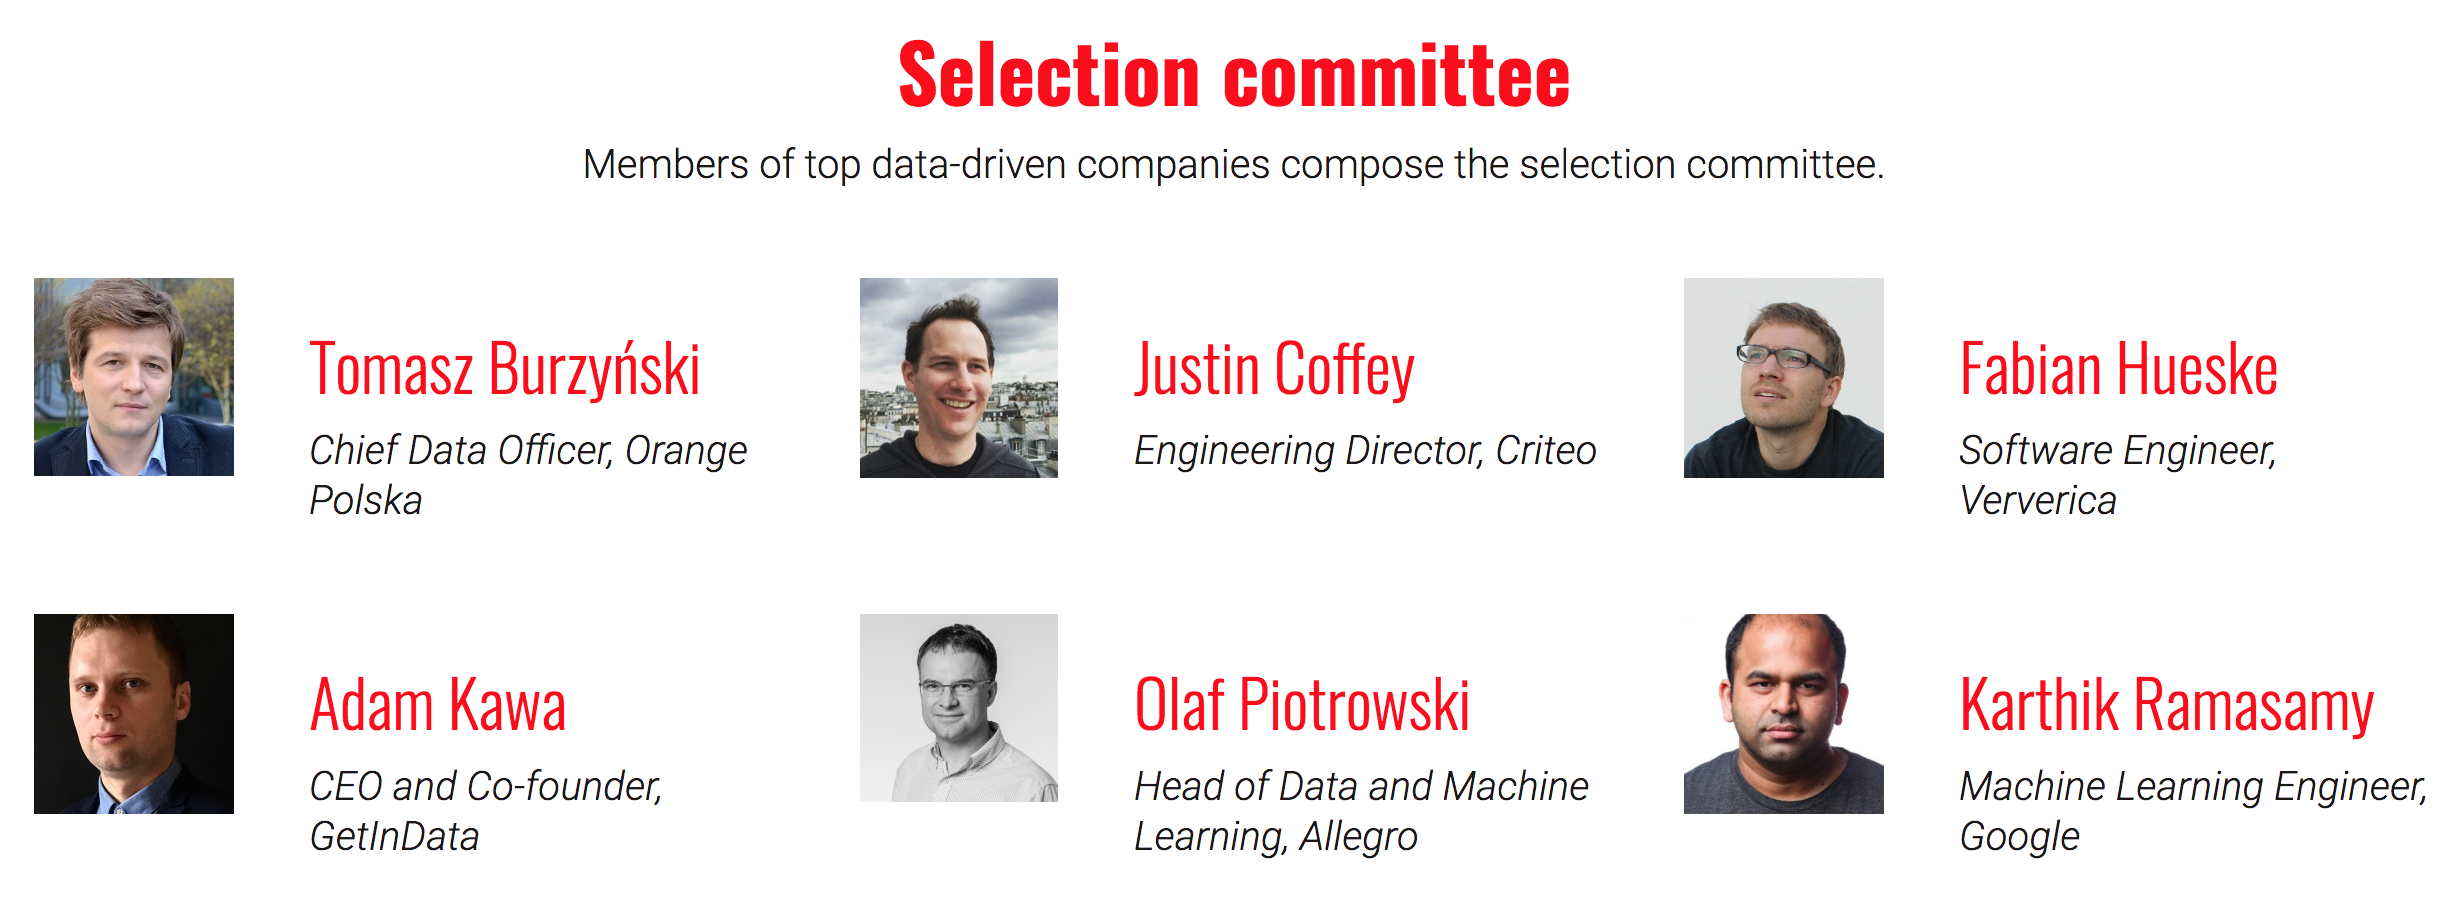 The members of the CfP committee in 2020 come from Google, Criteo, Ververica, Orange, Allegro and GetInData.